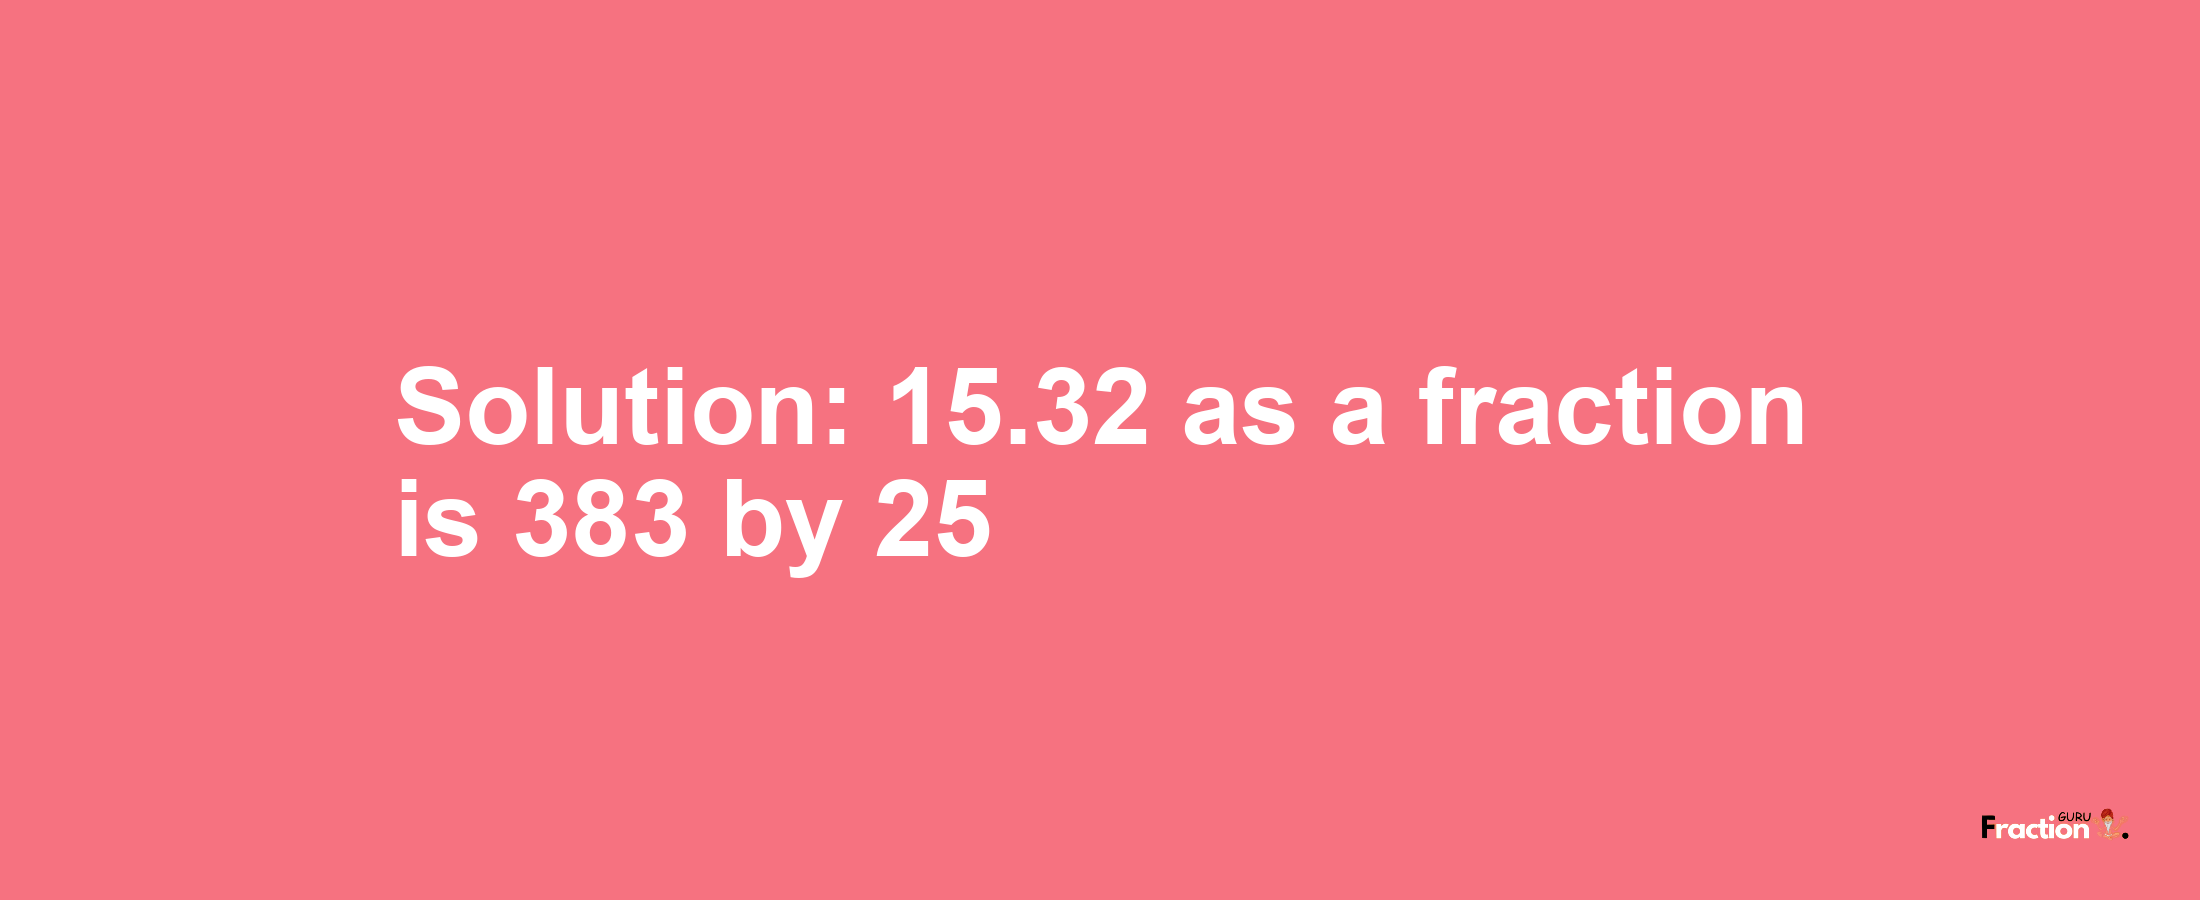 Solution:15.32 as a fraction is 383/25